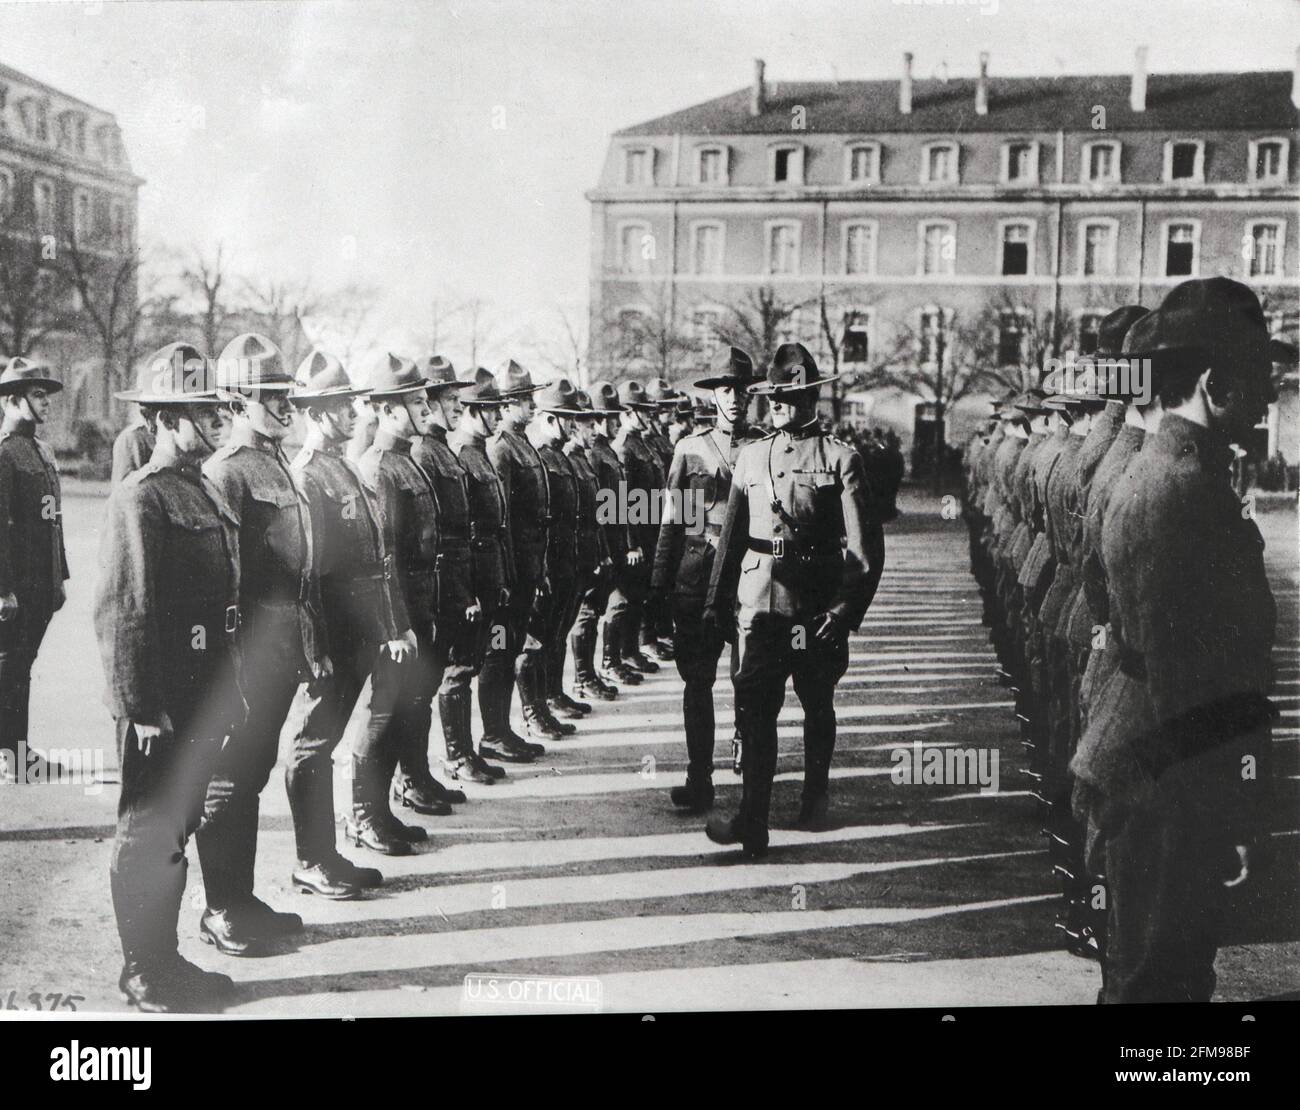 General Pershing inspecting U.S. troops at Chaumont, France 1917 Stock Photo